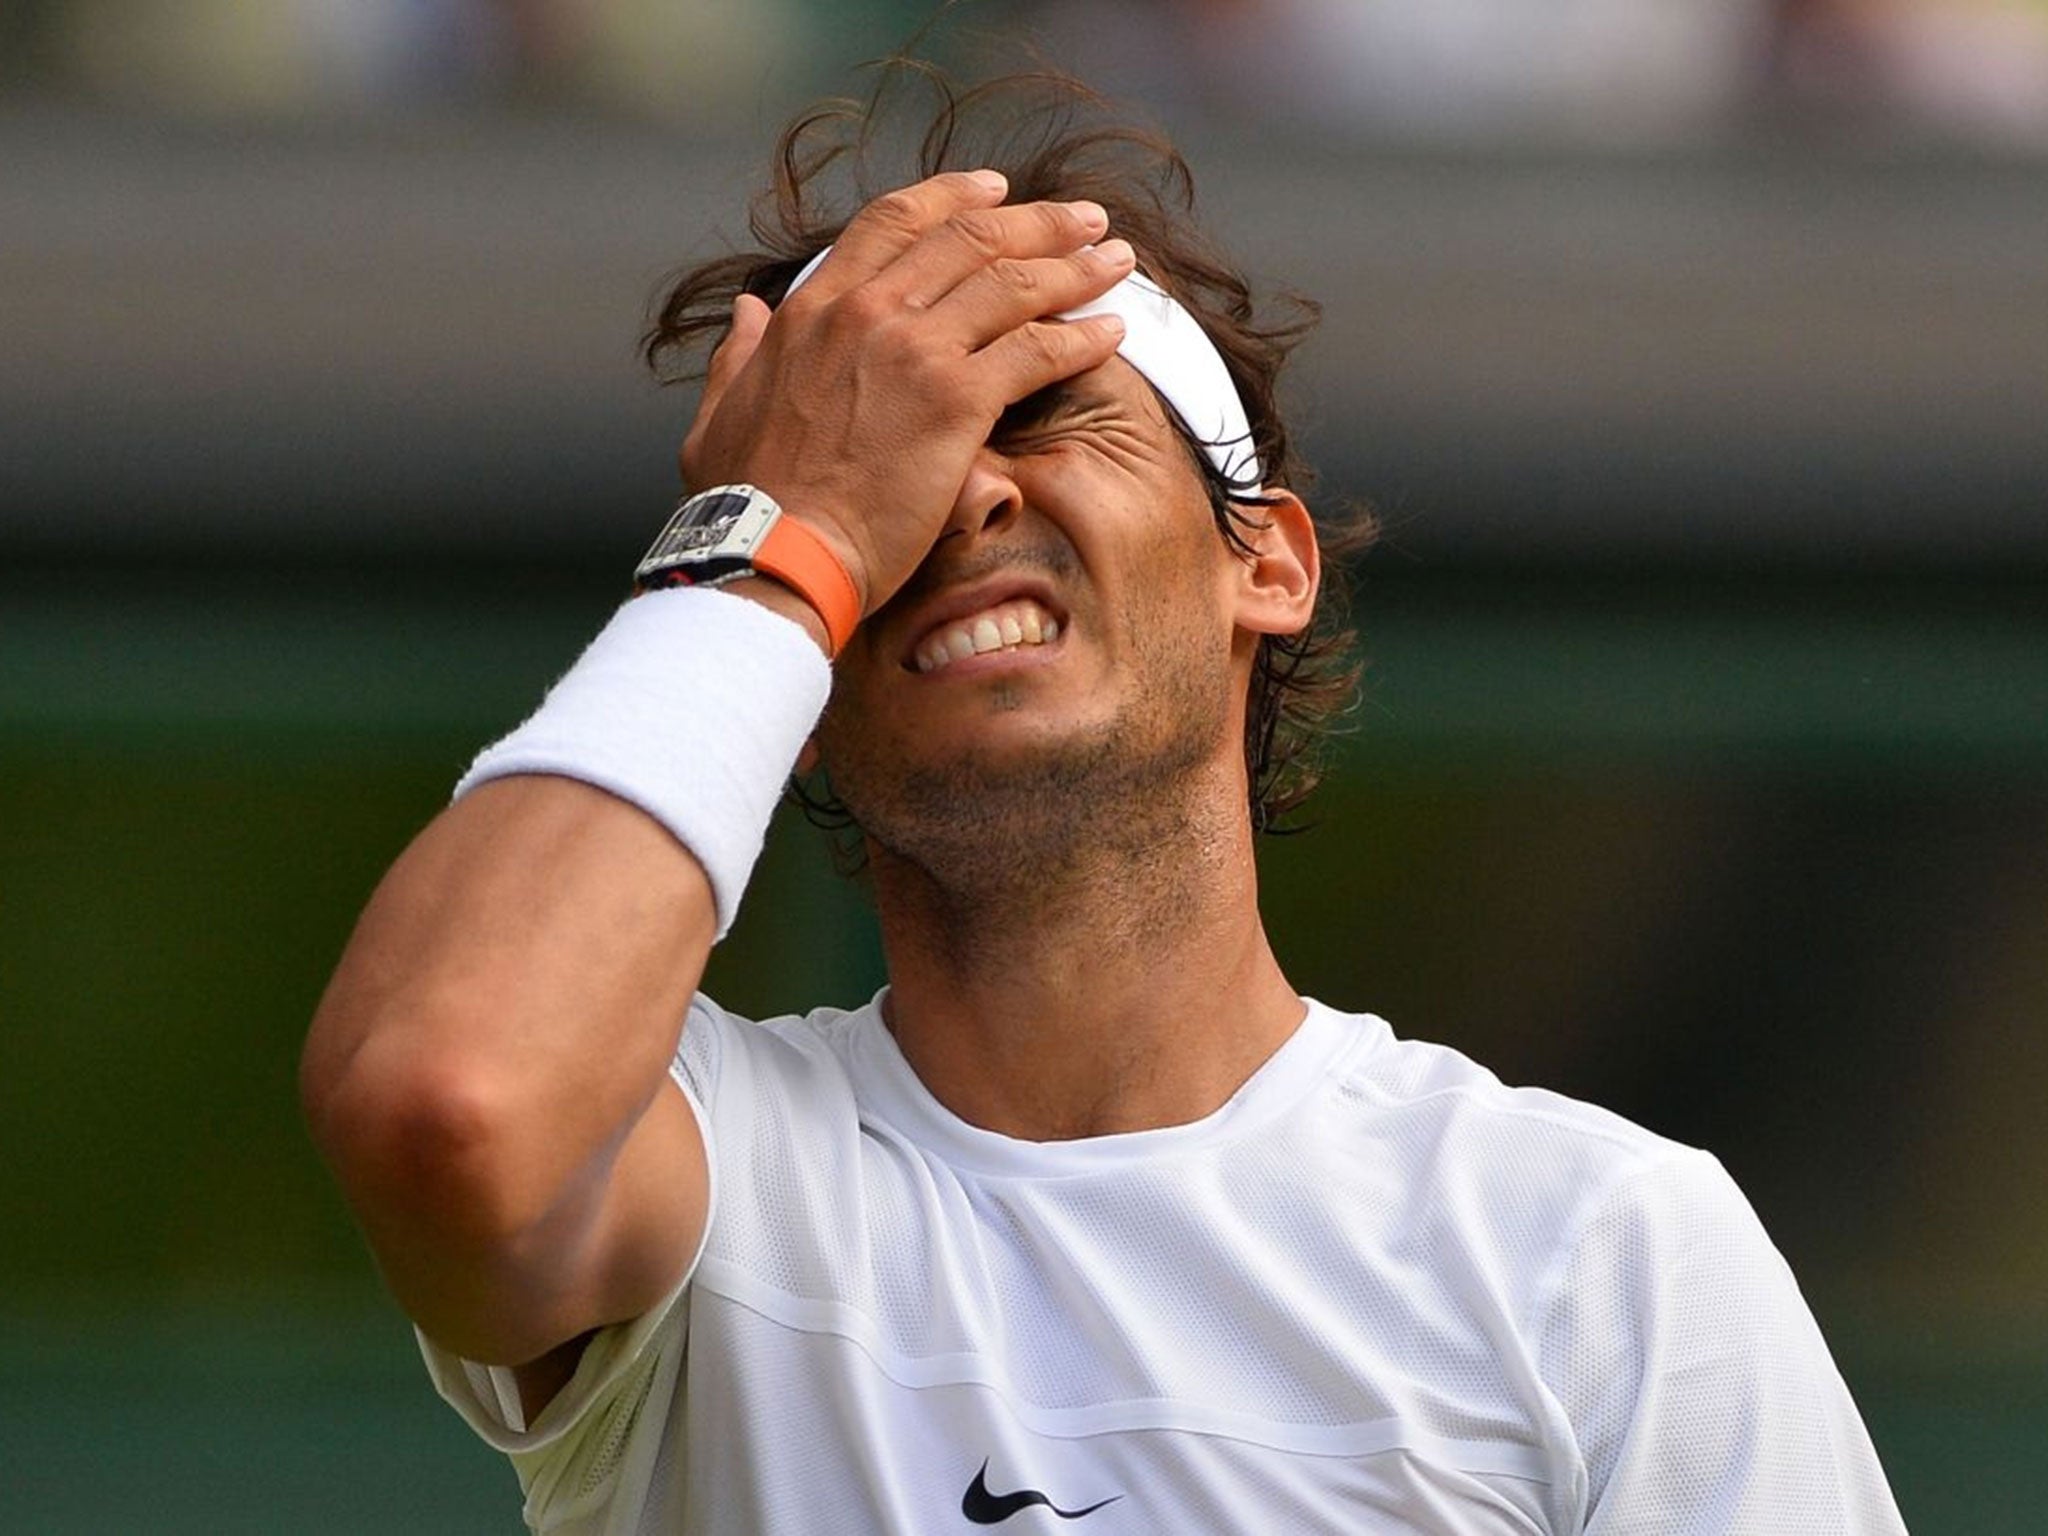 Nadal reacts after a point against Brown during their match (Image: AFP)